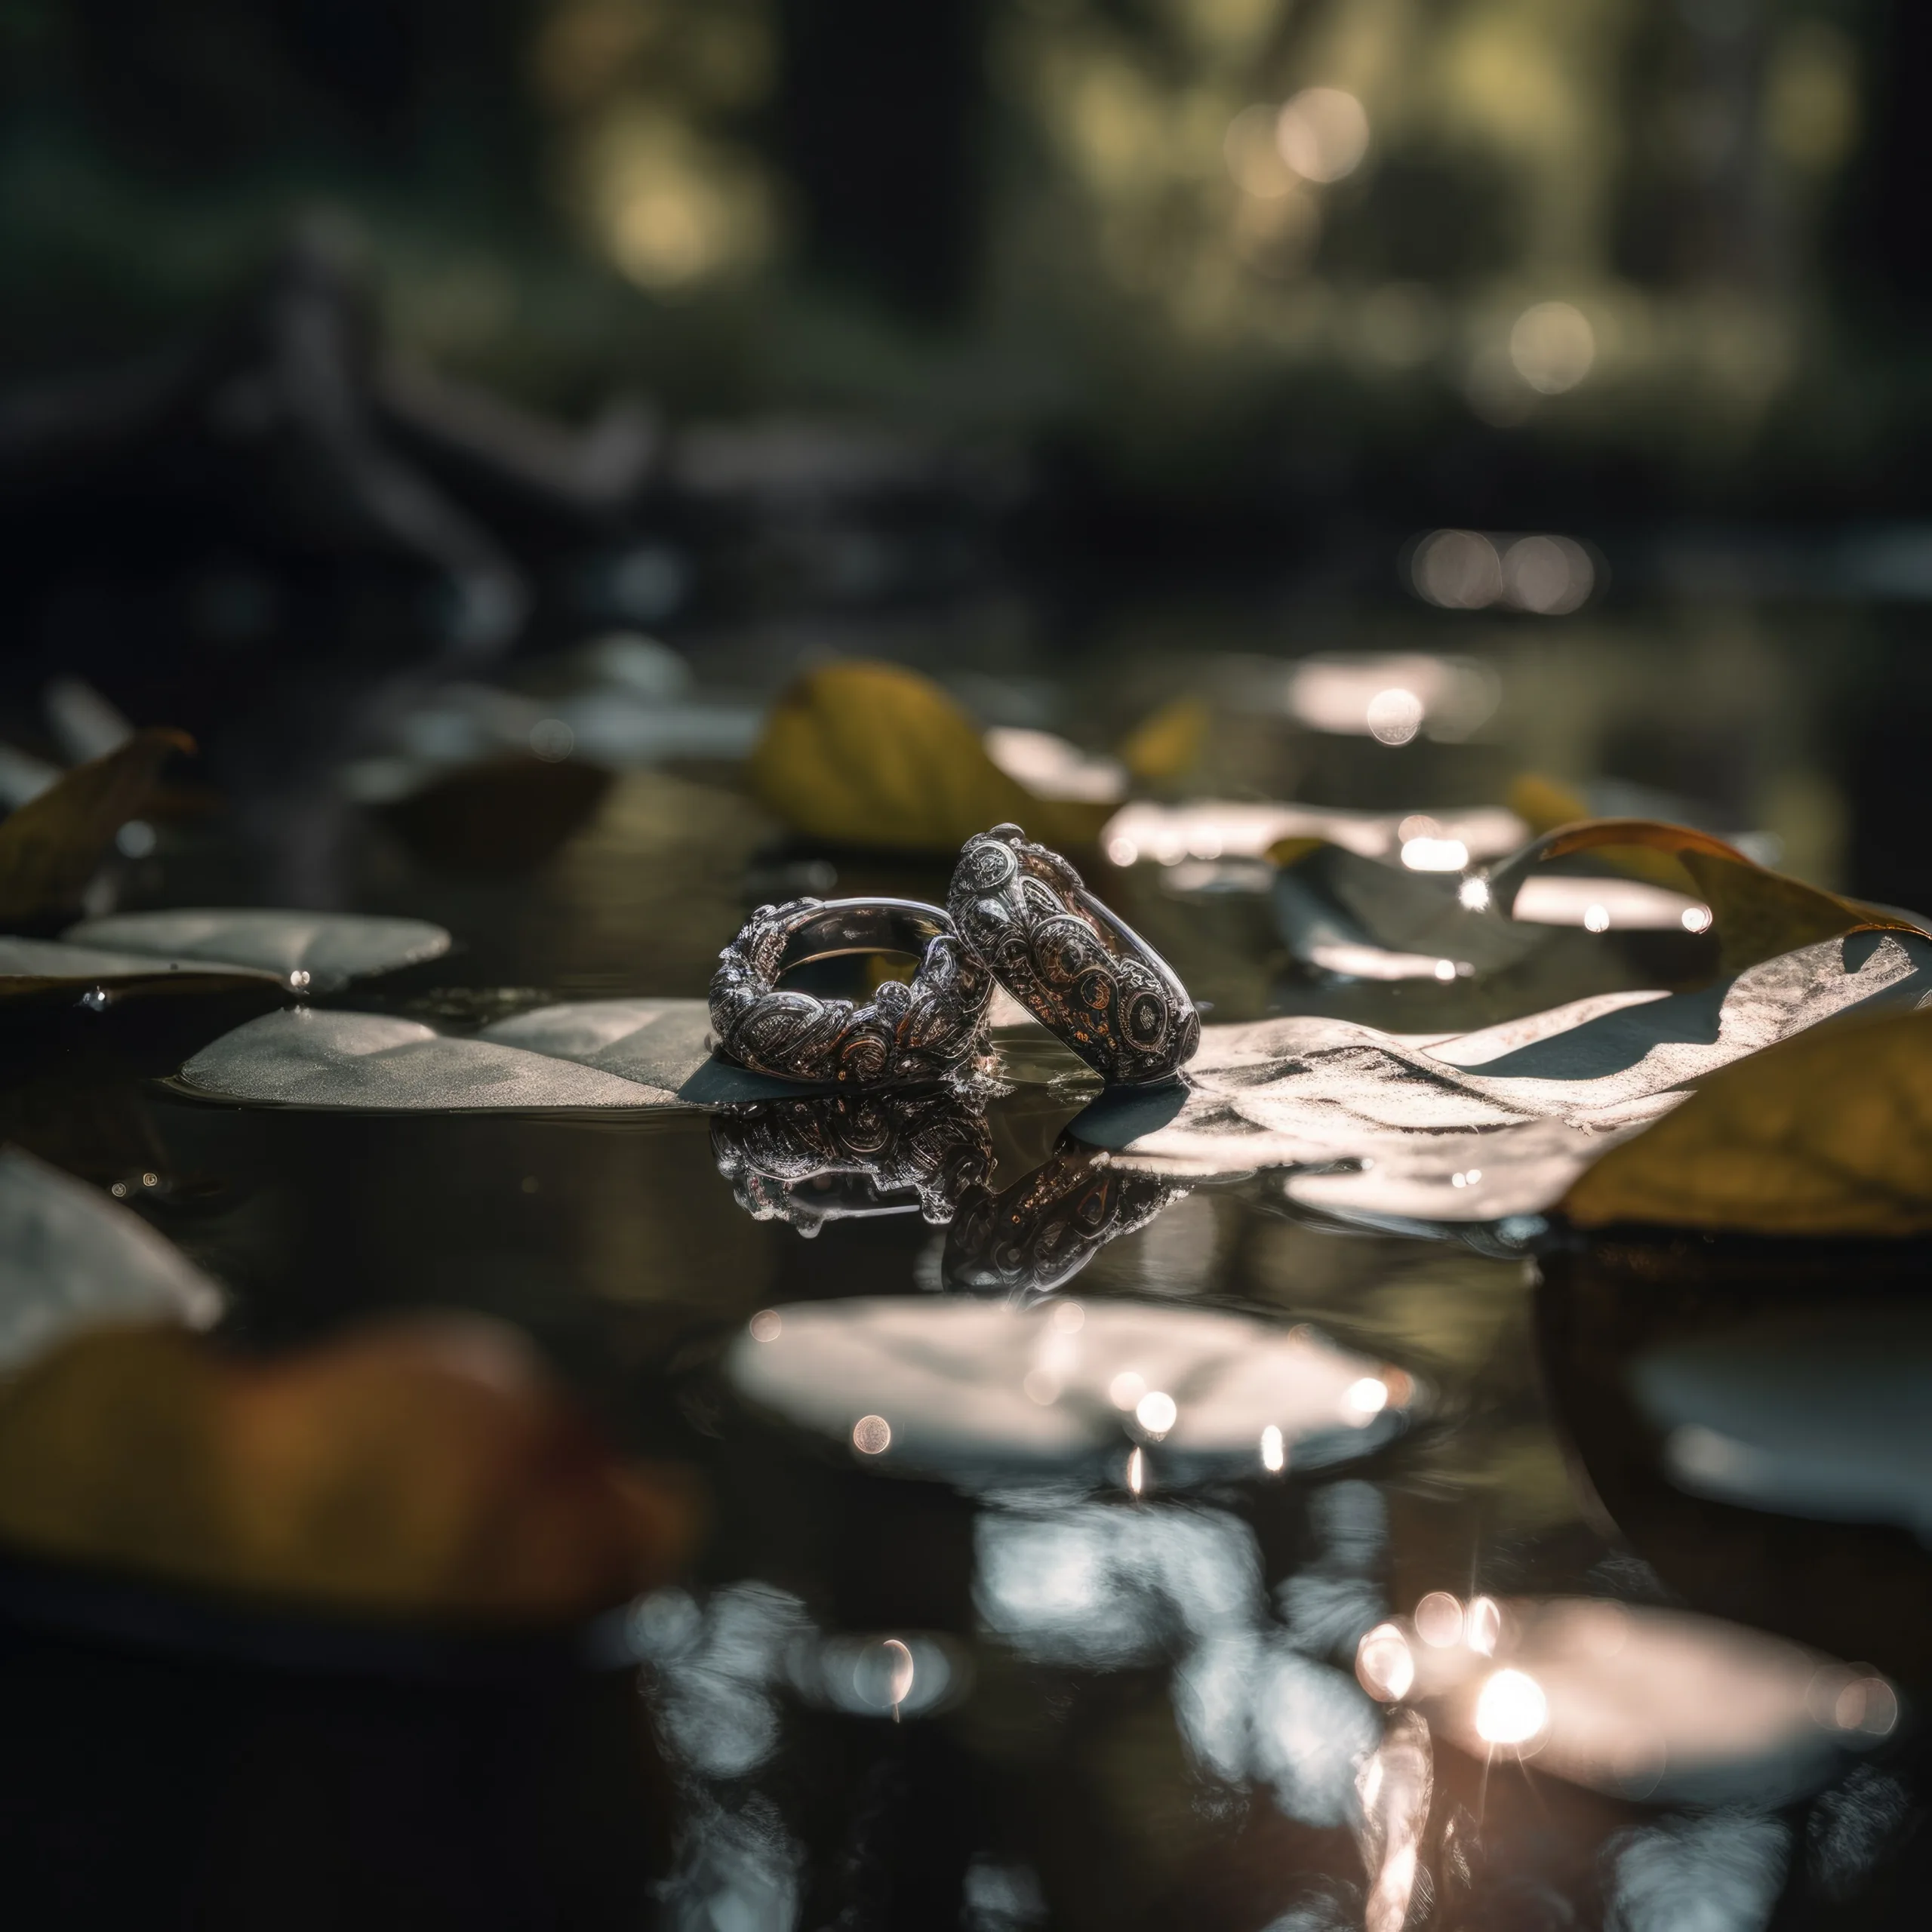 Wedding Photographer Roth Bar: Two wedding rings on top of water lilies in a pond.